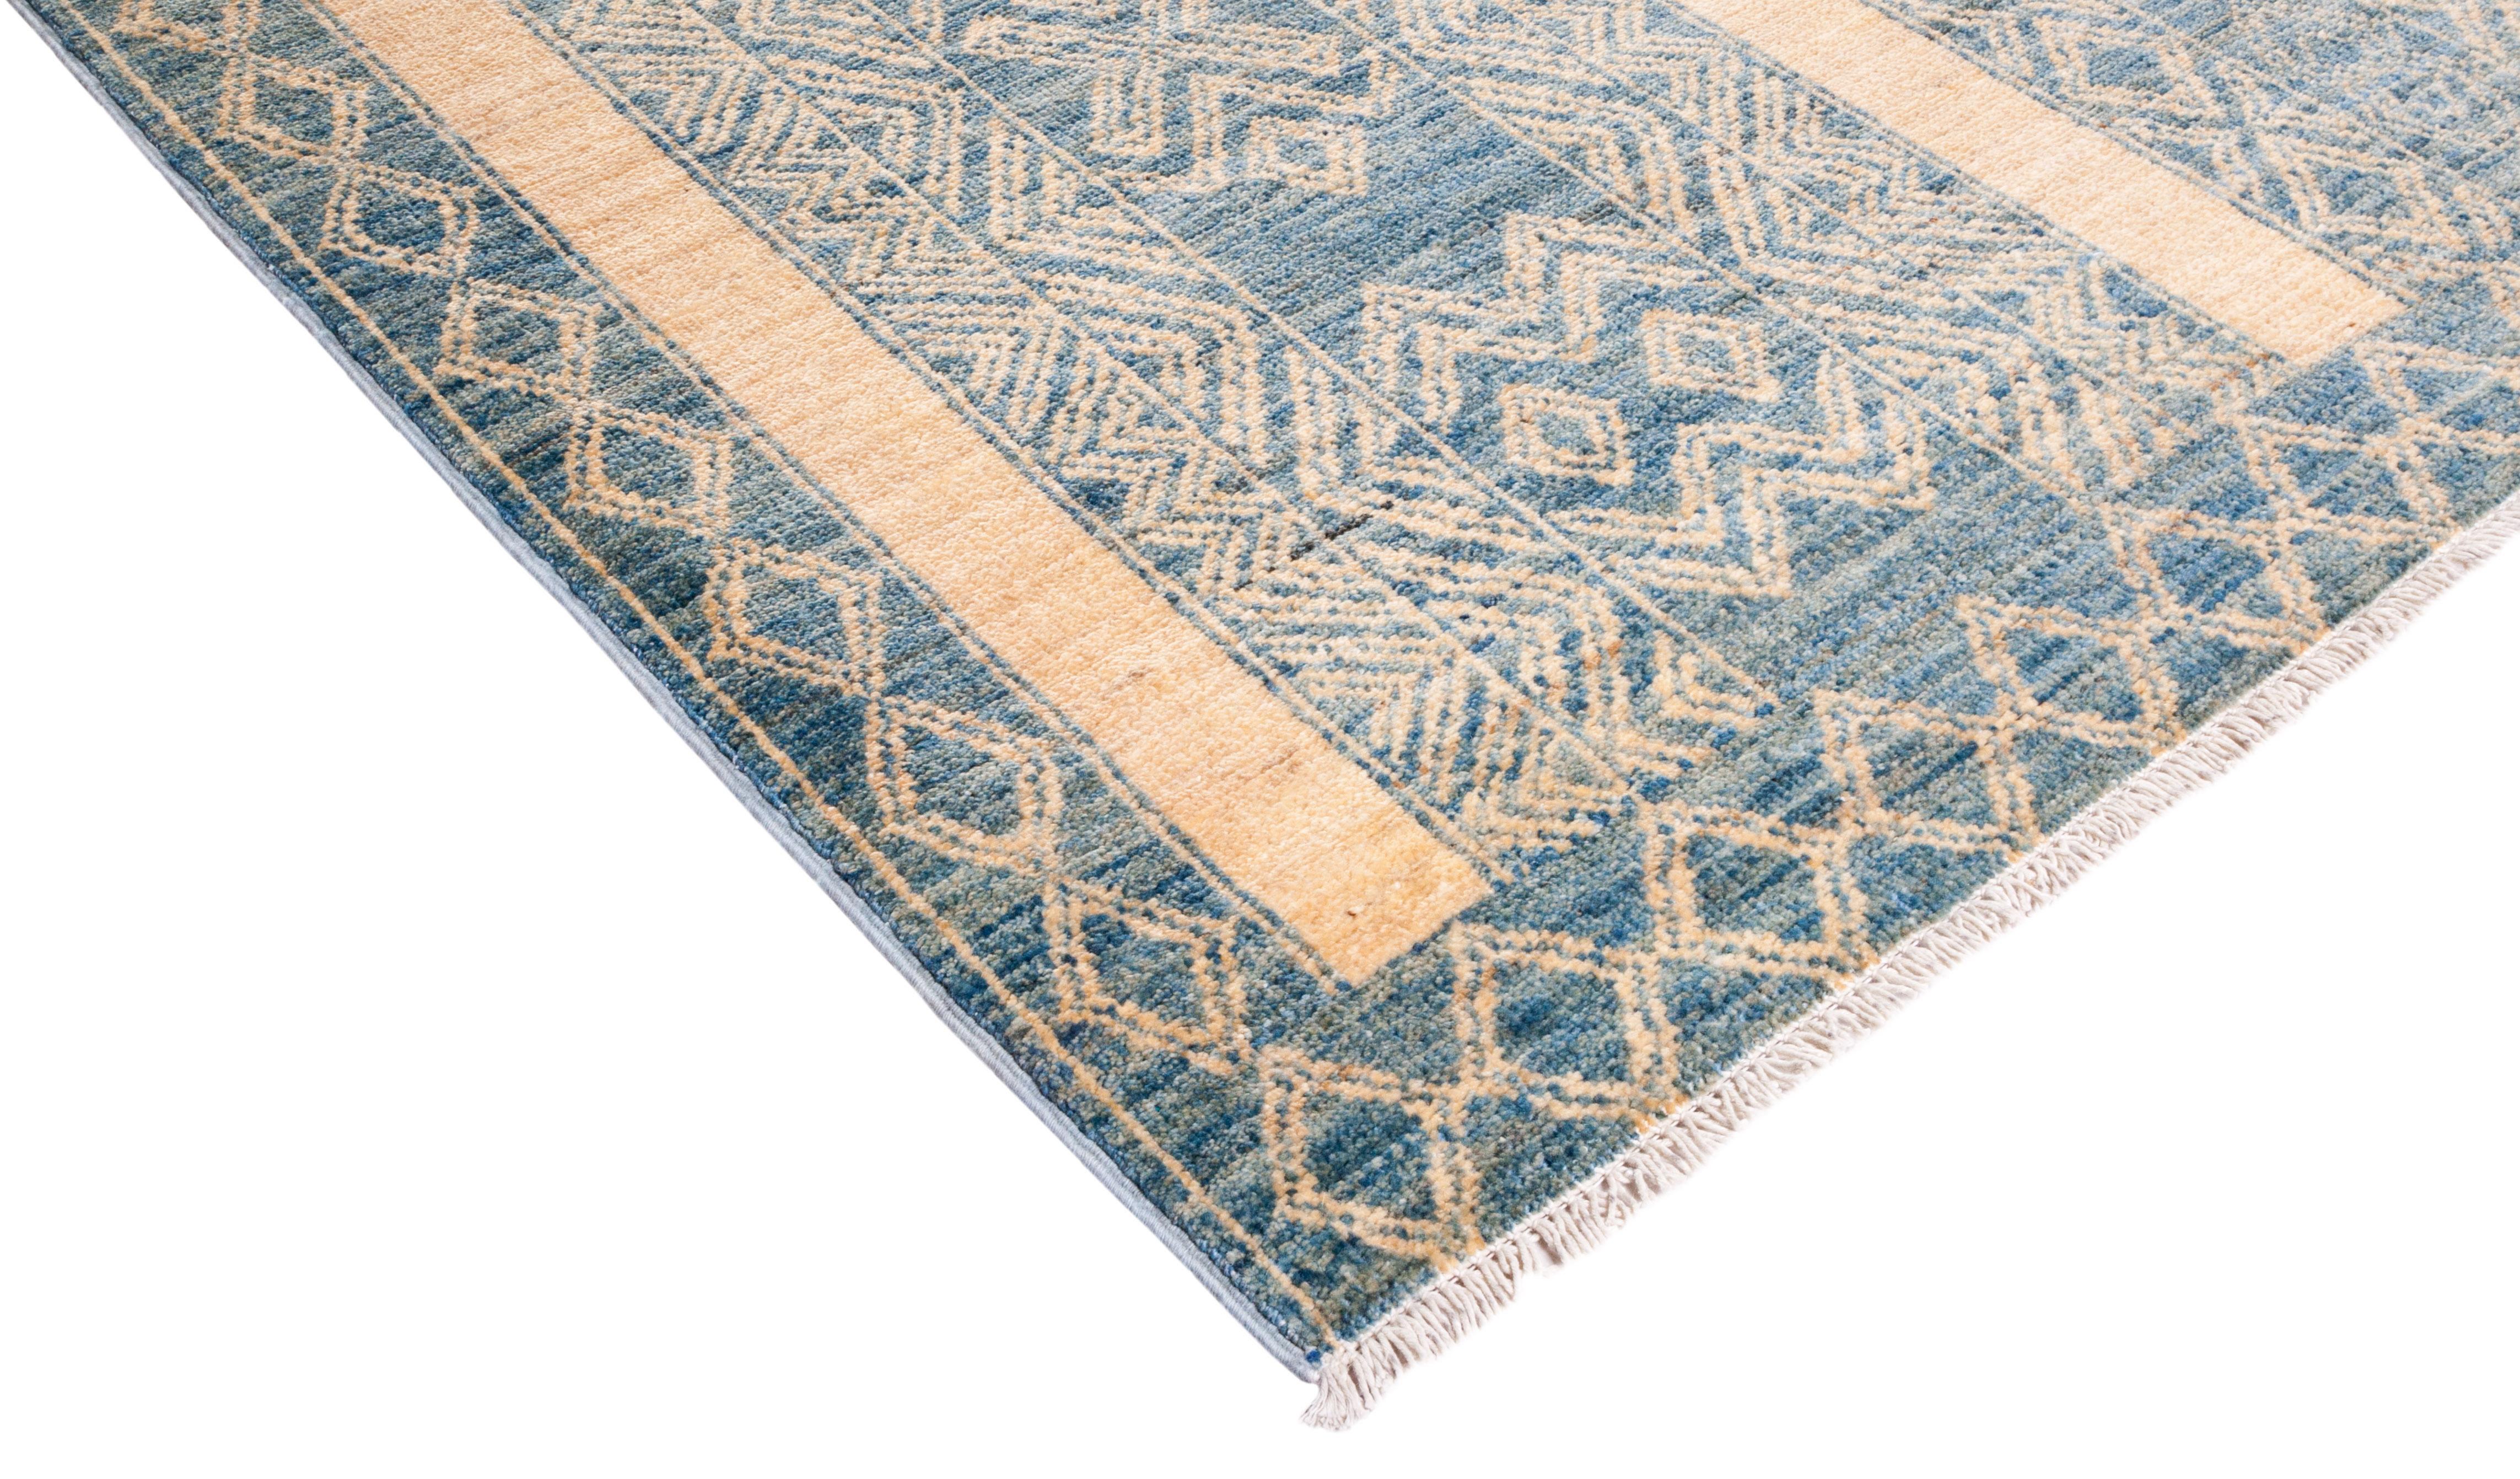 Color: Ivory, made in Pakistan. 100% wool. The rich textile tradition of western Africa inspired the Tribal collection of hand knotted rugs. Incorporating a medley of geometric motifs, in palettes ranging from earthy to vivacious, these rugs bring a